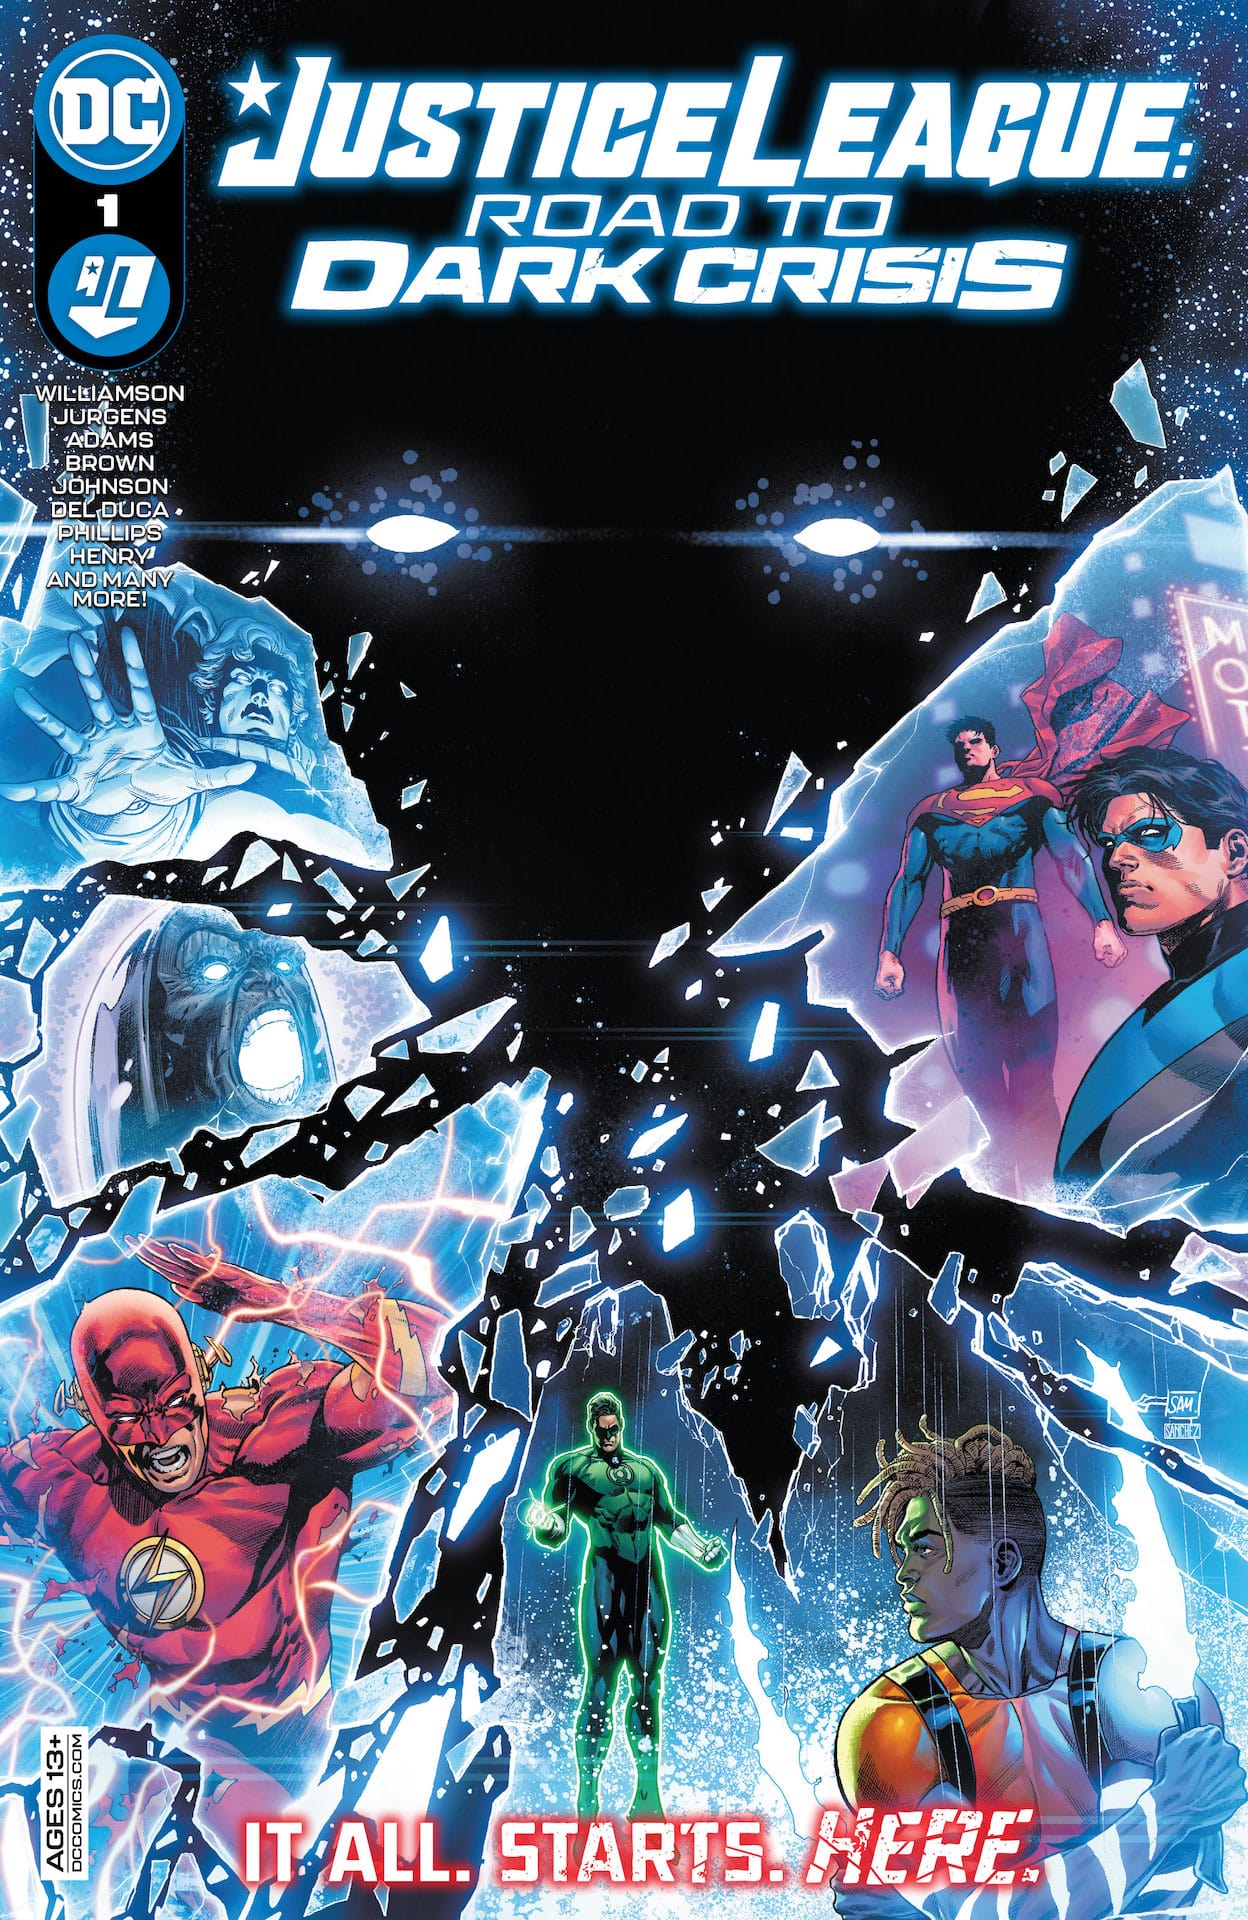 DC Preview: Justice League: Road to Dark Crisis #1